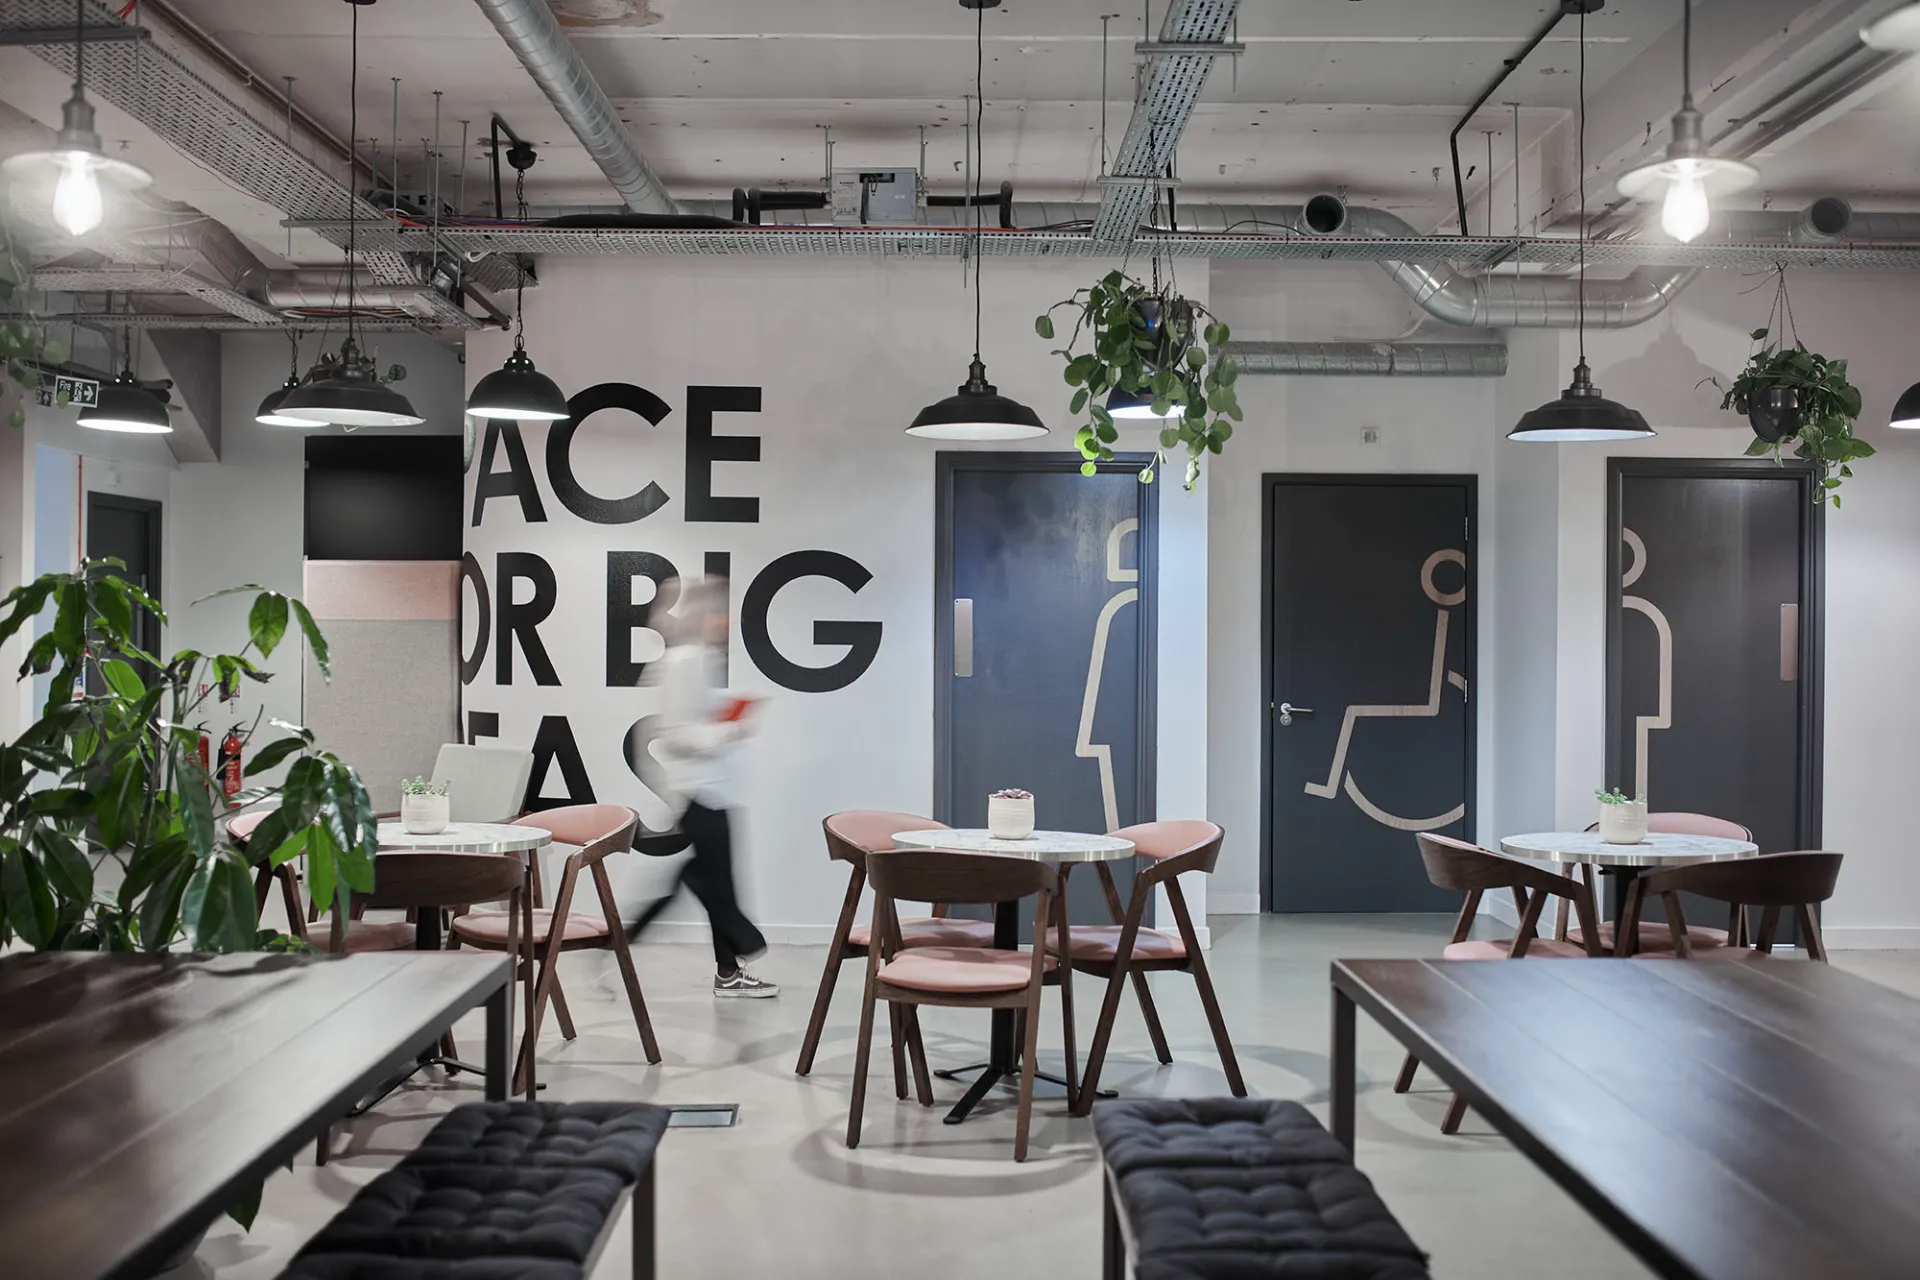 Techspace Co-working space Desks day pass bookings